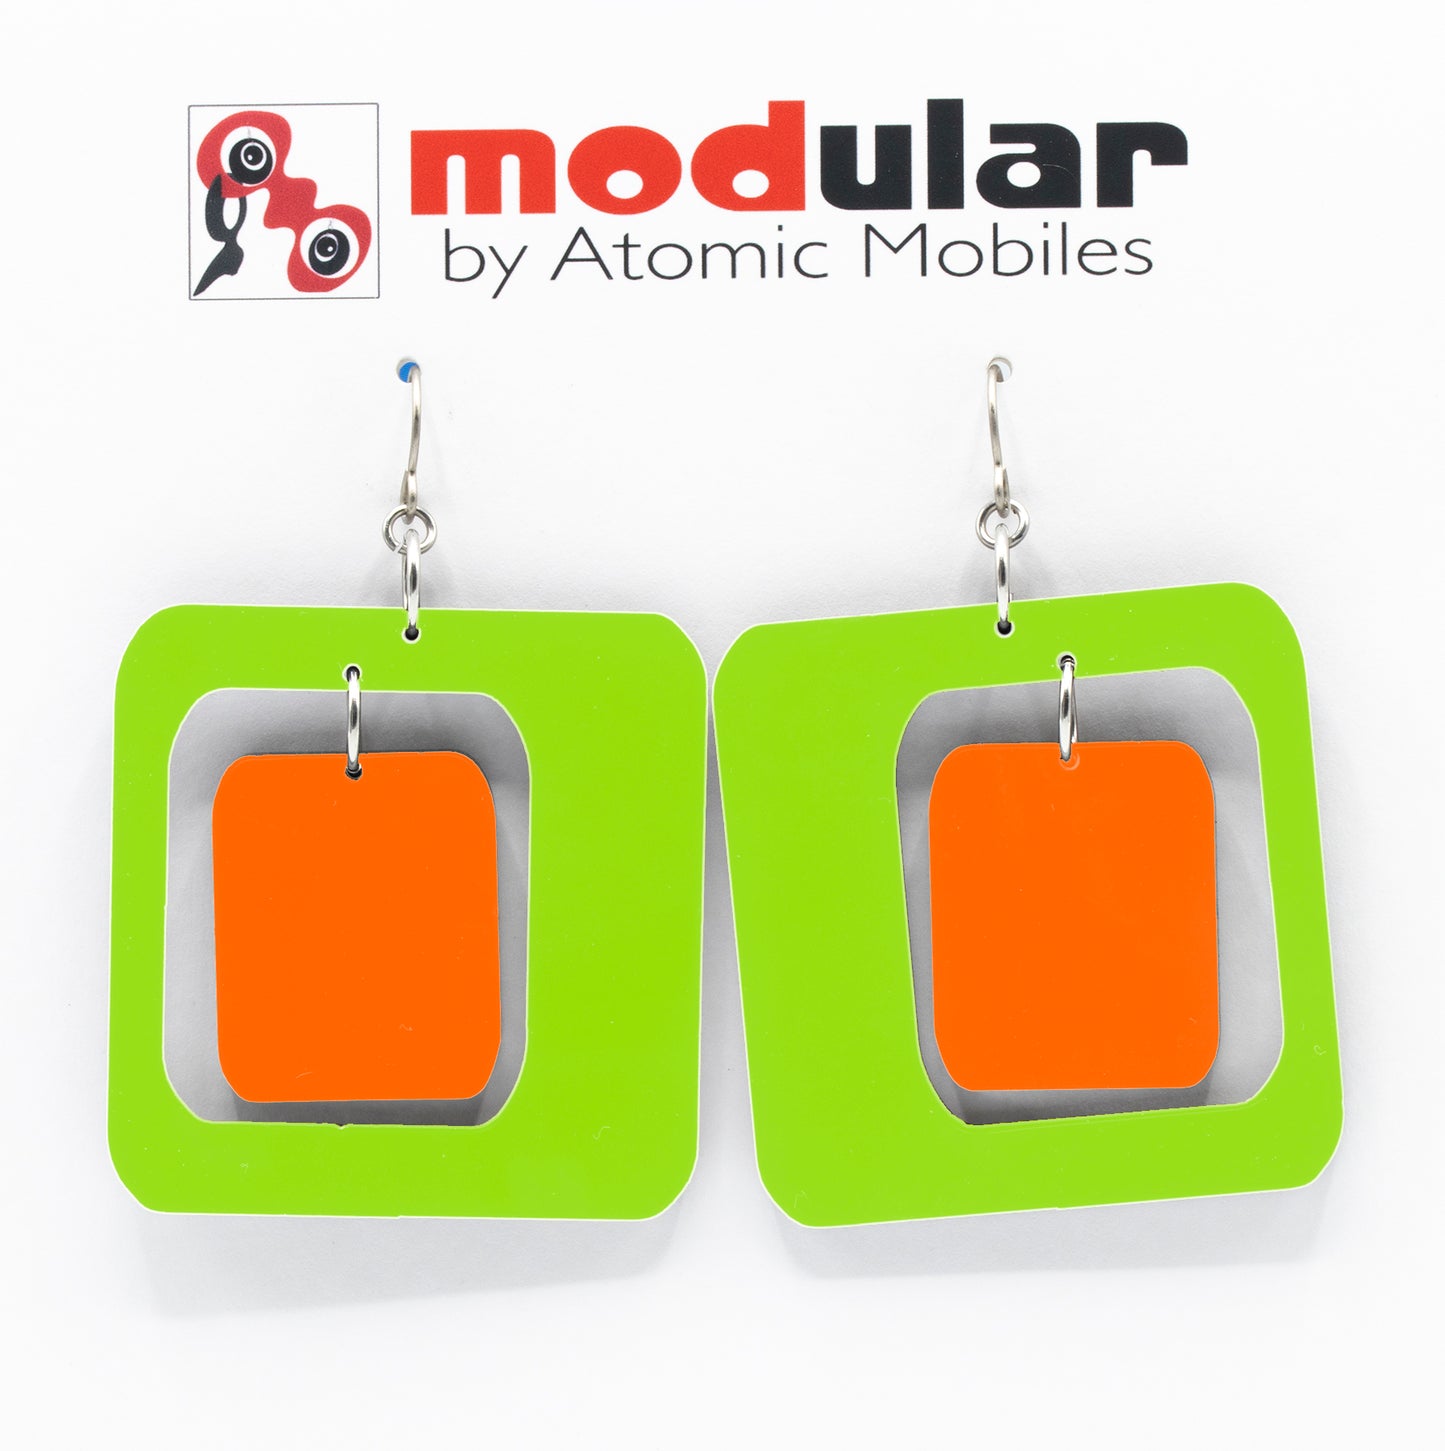 MODular Earrings - Coolsville Statement Earrings in Lime and Orange by AtomicMobiles.com - retro era inspired mod handmade jewelry